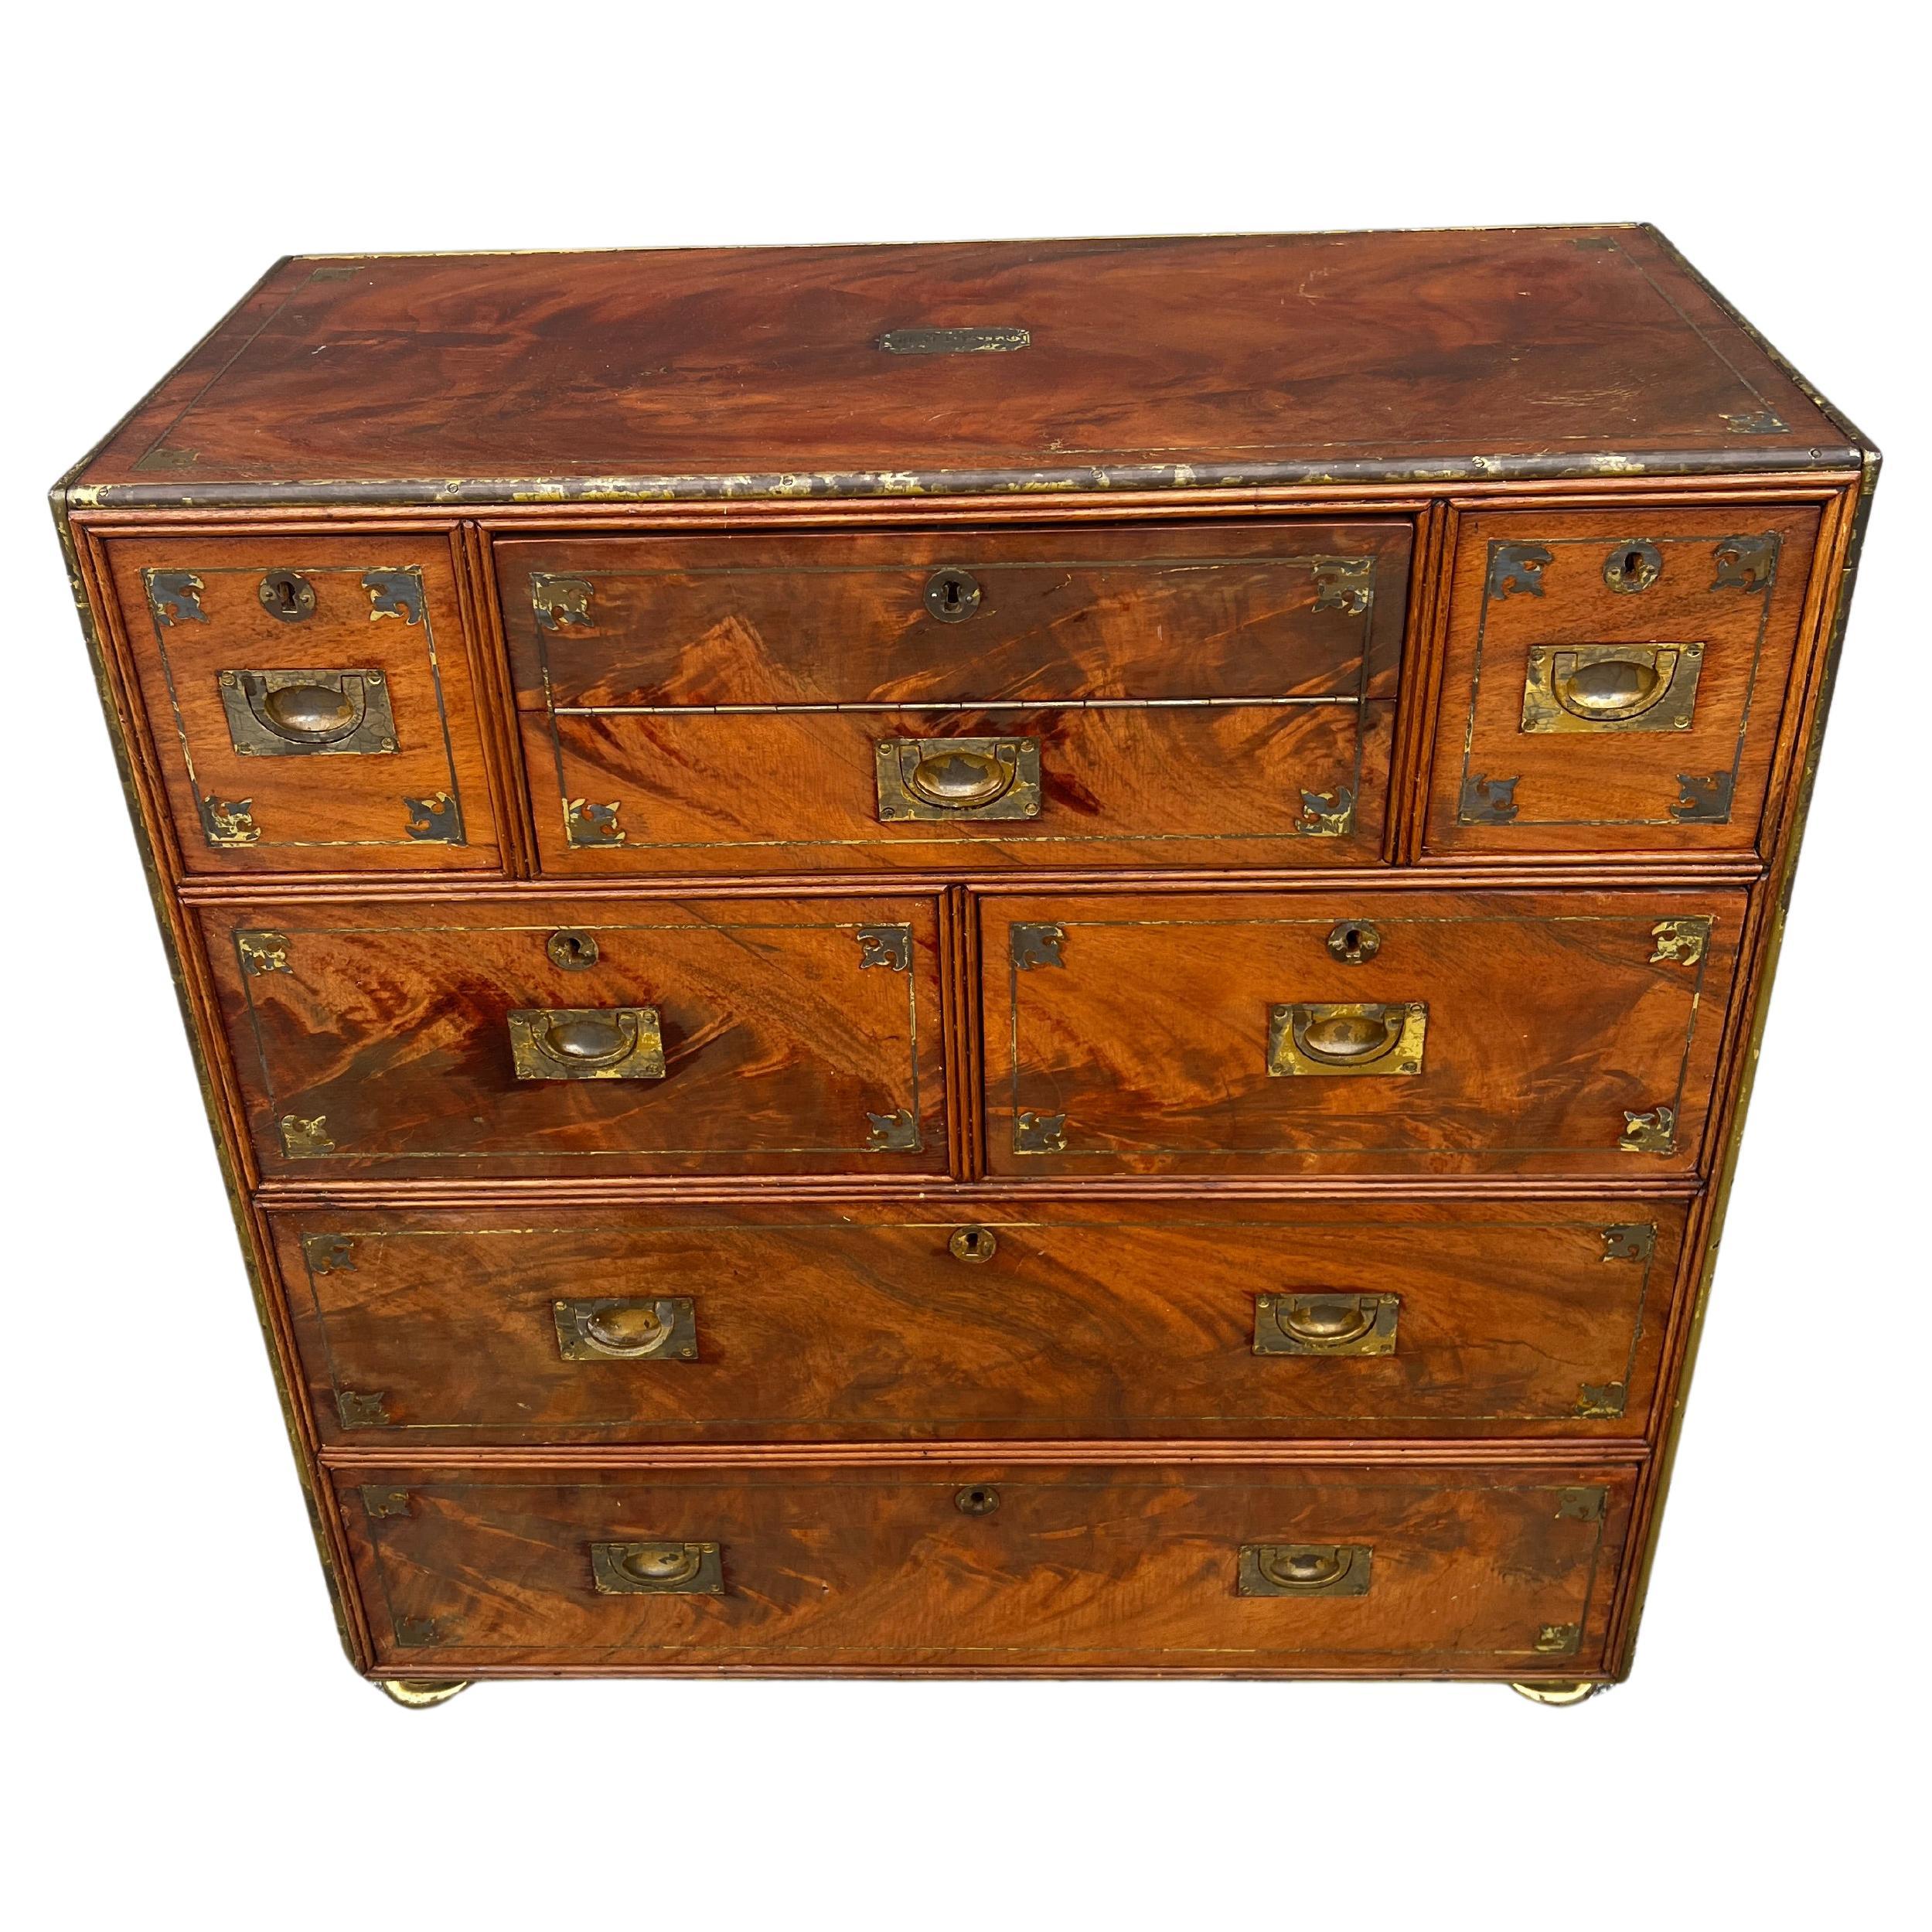 Anglo Raj Regency Campaign Chest with Desk Trimmed in Brass Banding Accents 1811 For Sale